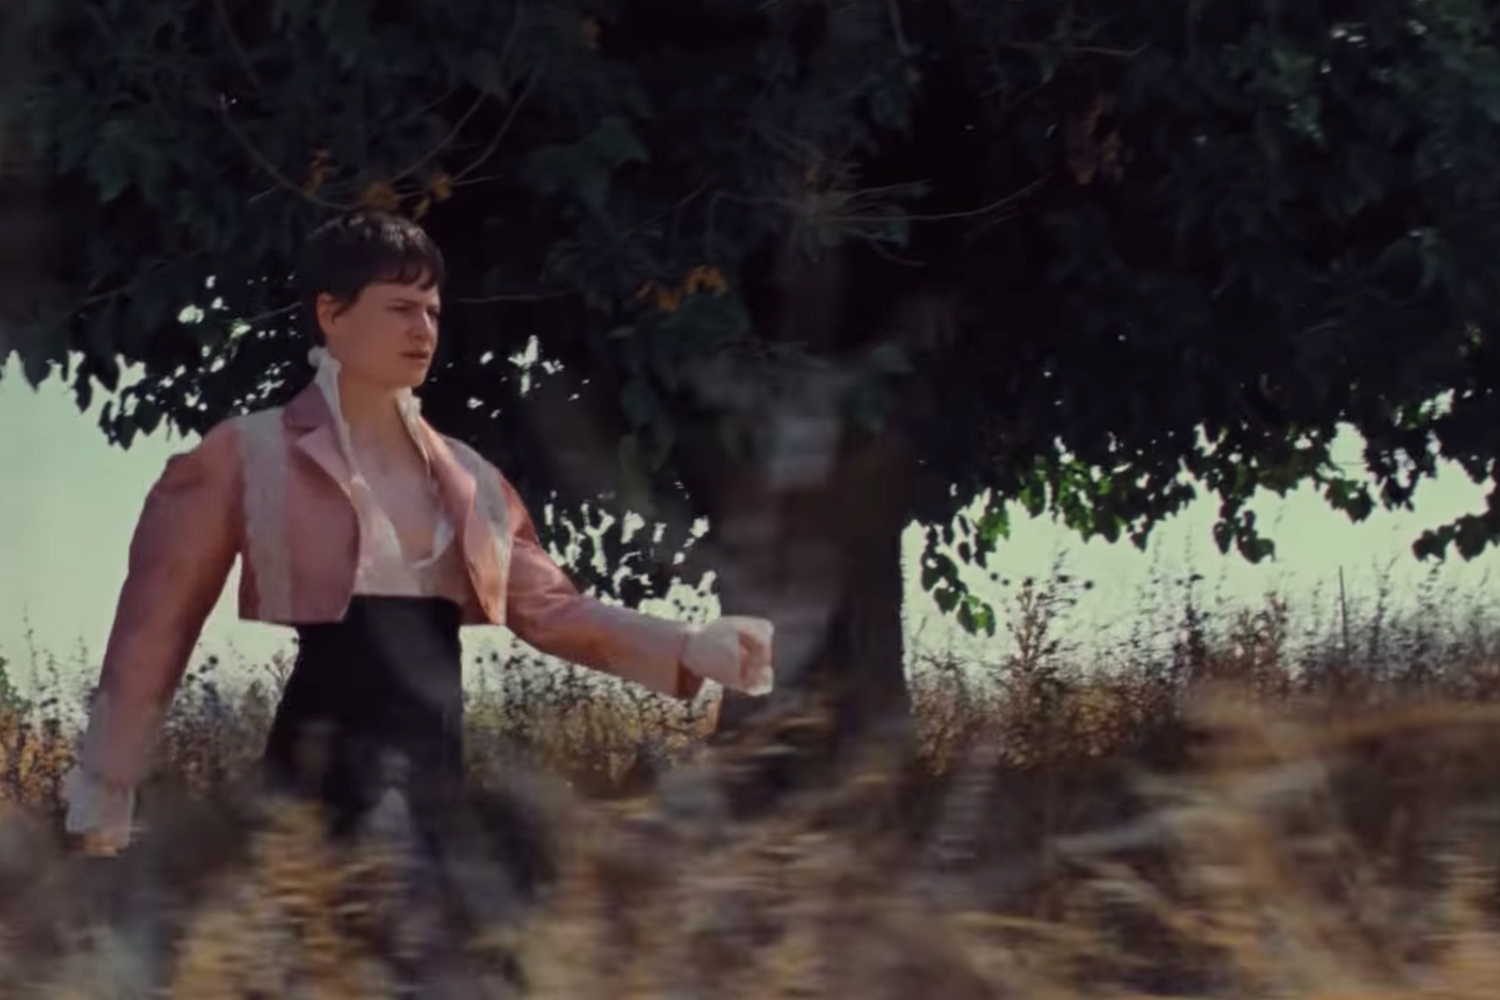 Christine and the Queens shares ‘La marcheuse’ video